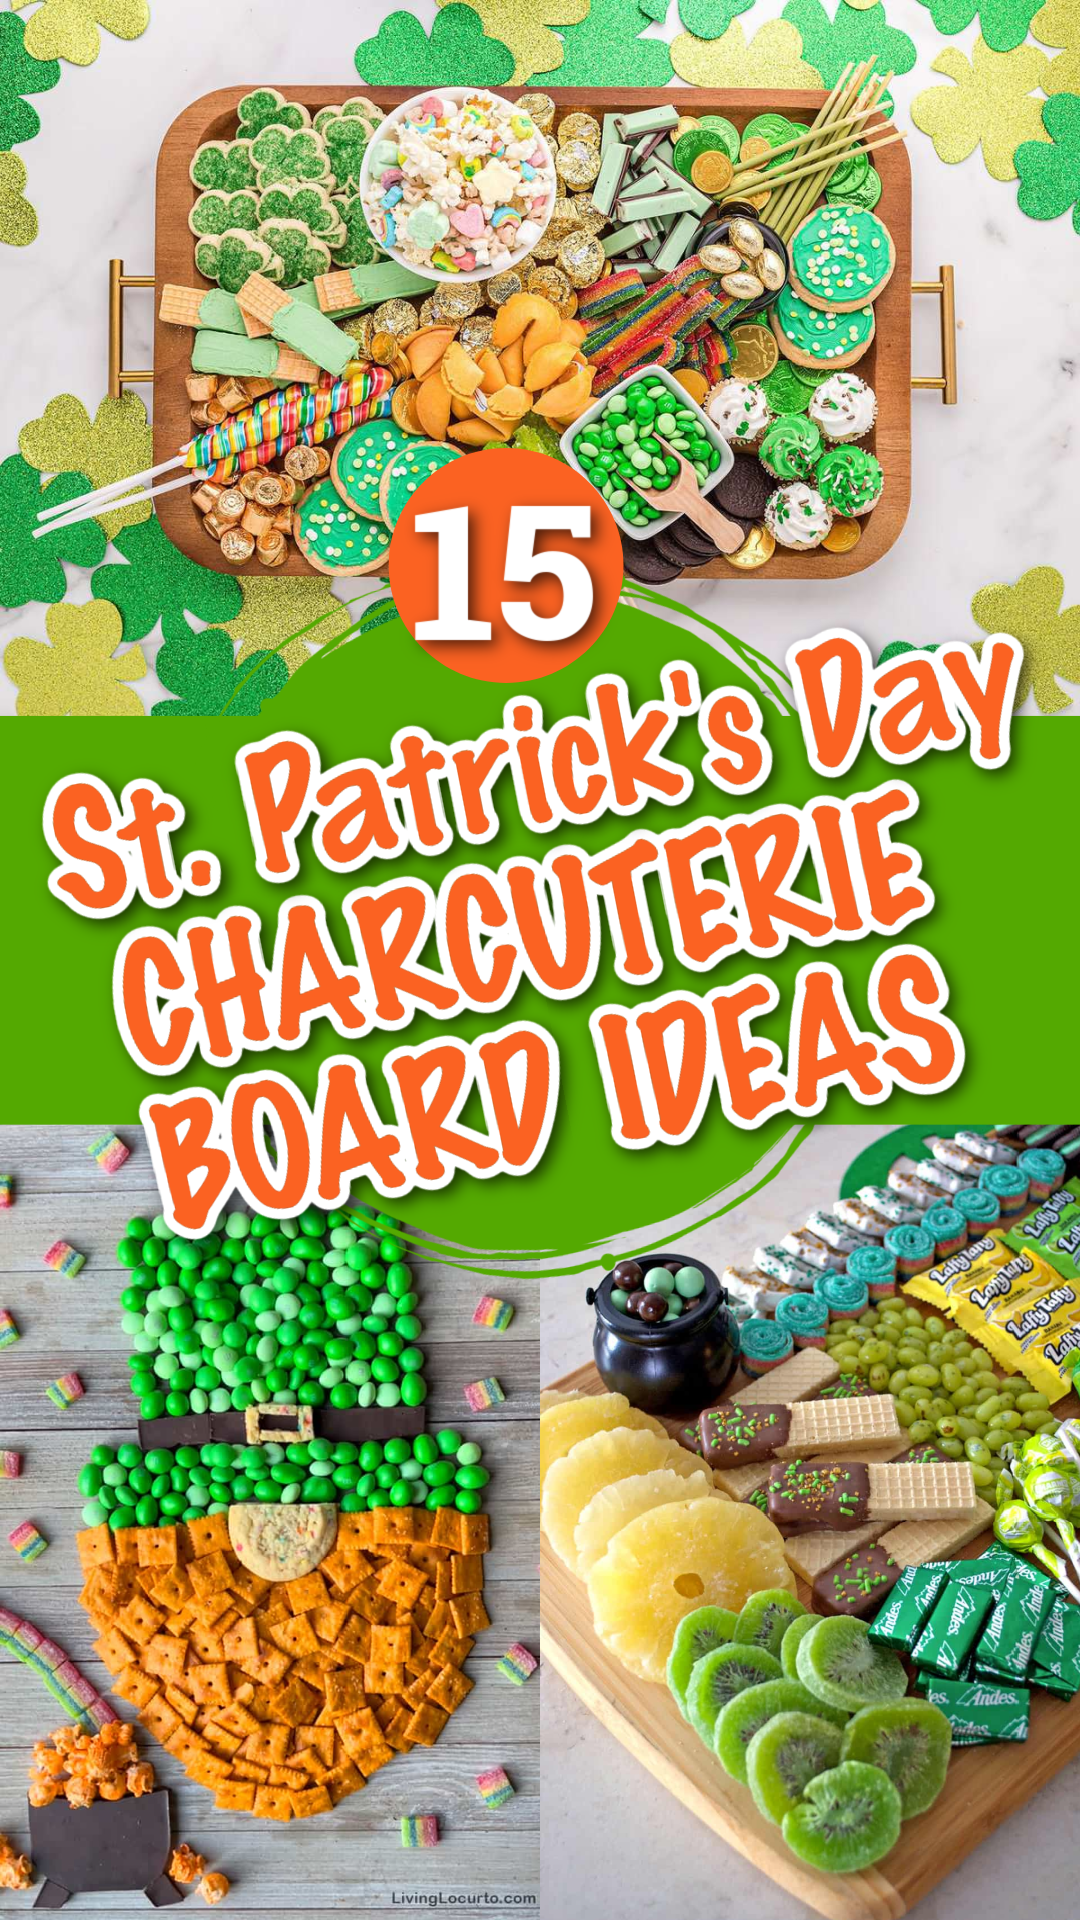 A collage of St. Patrick's Day charcuterie board ideas including rainbow fruit trays and green snack boards.